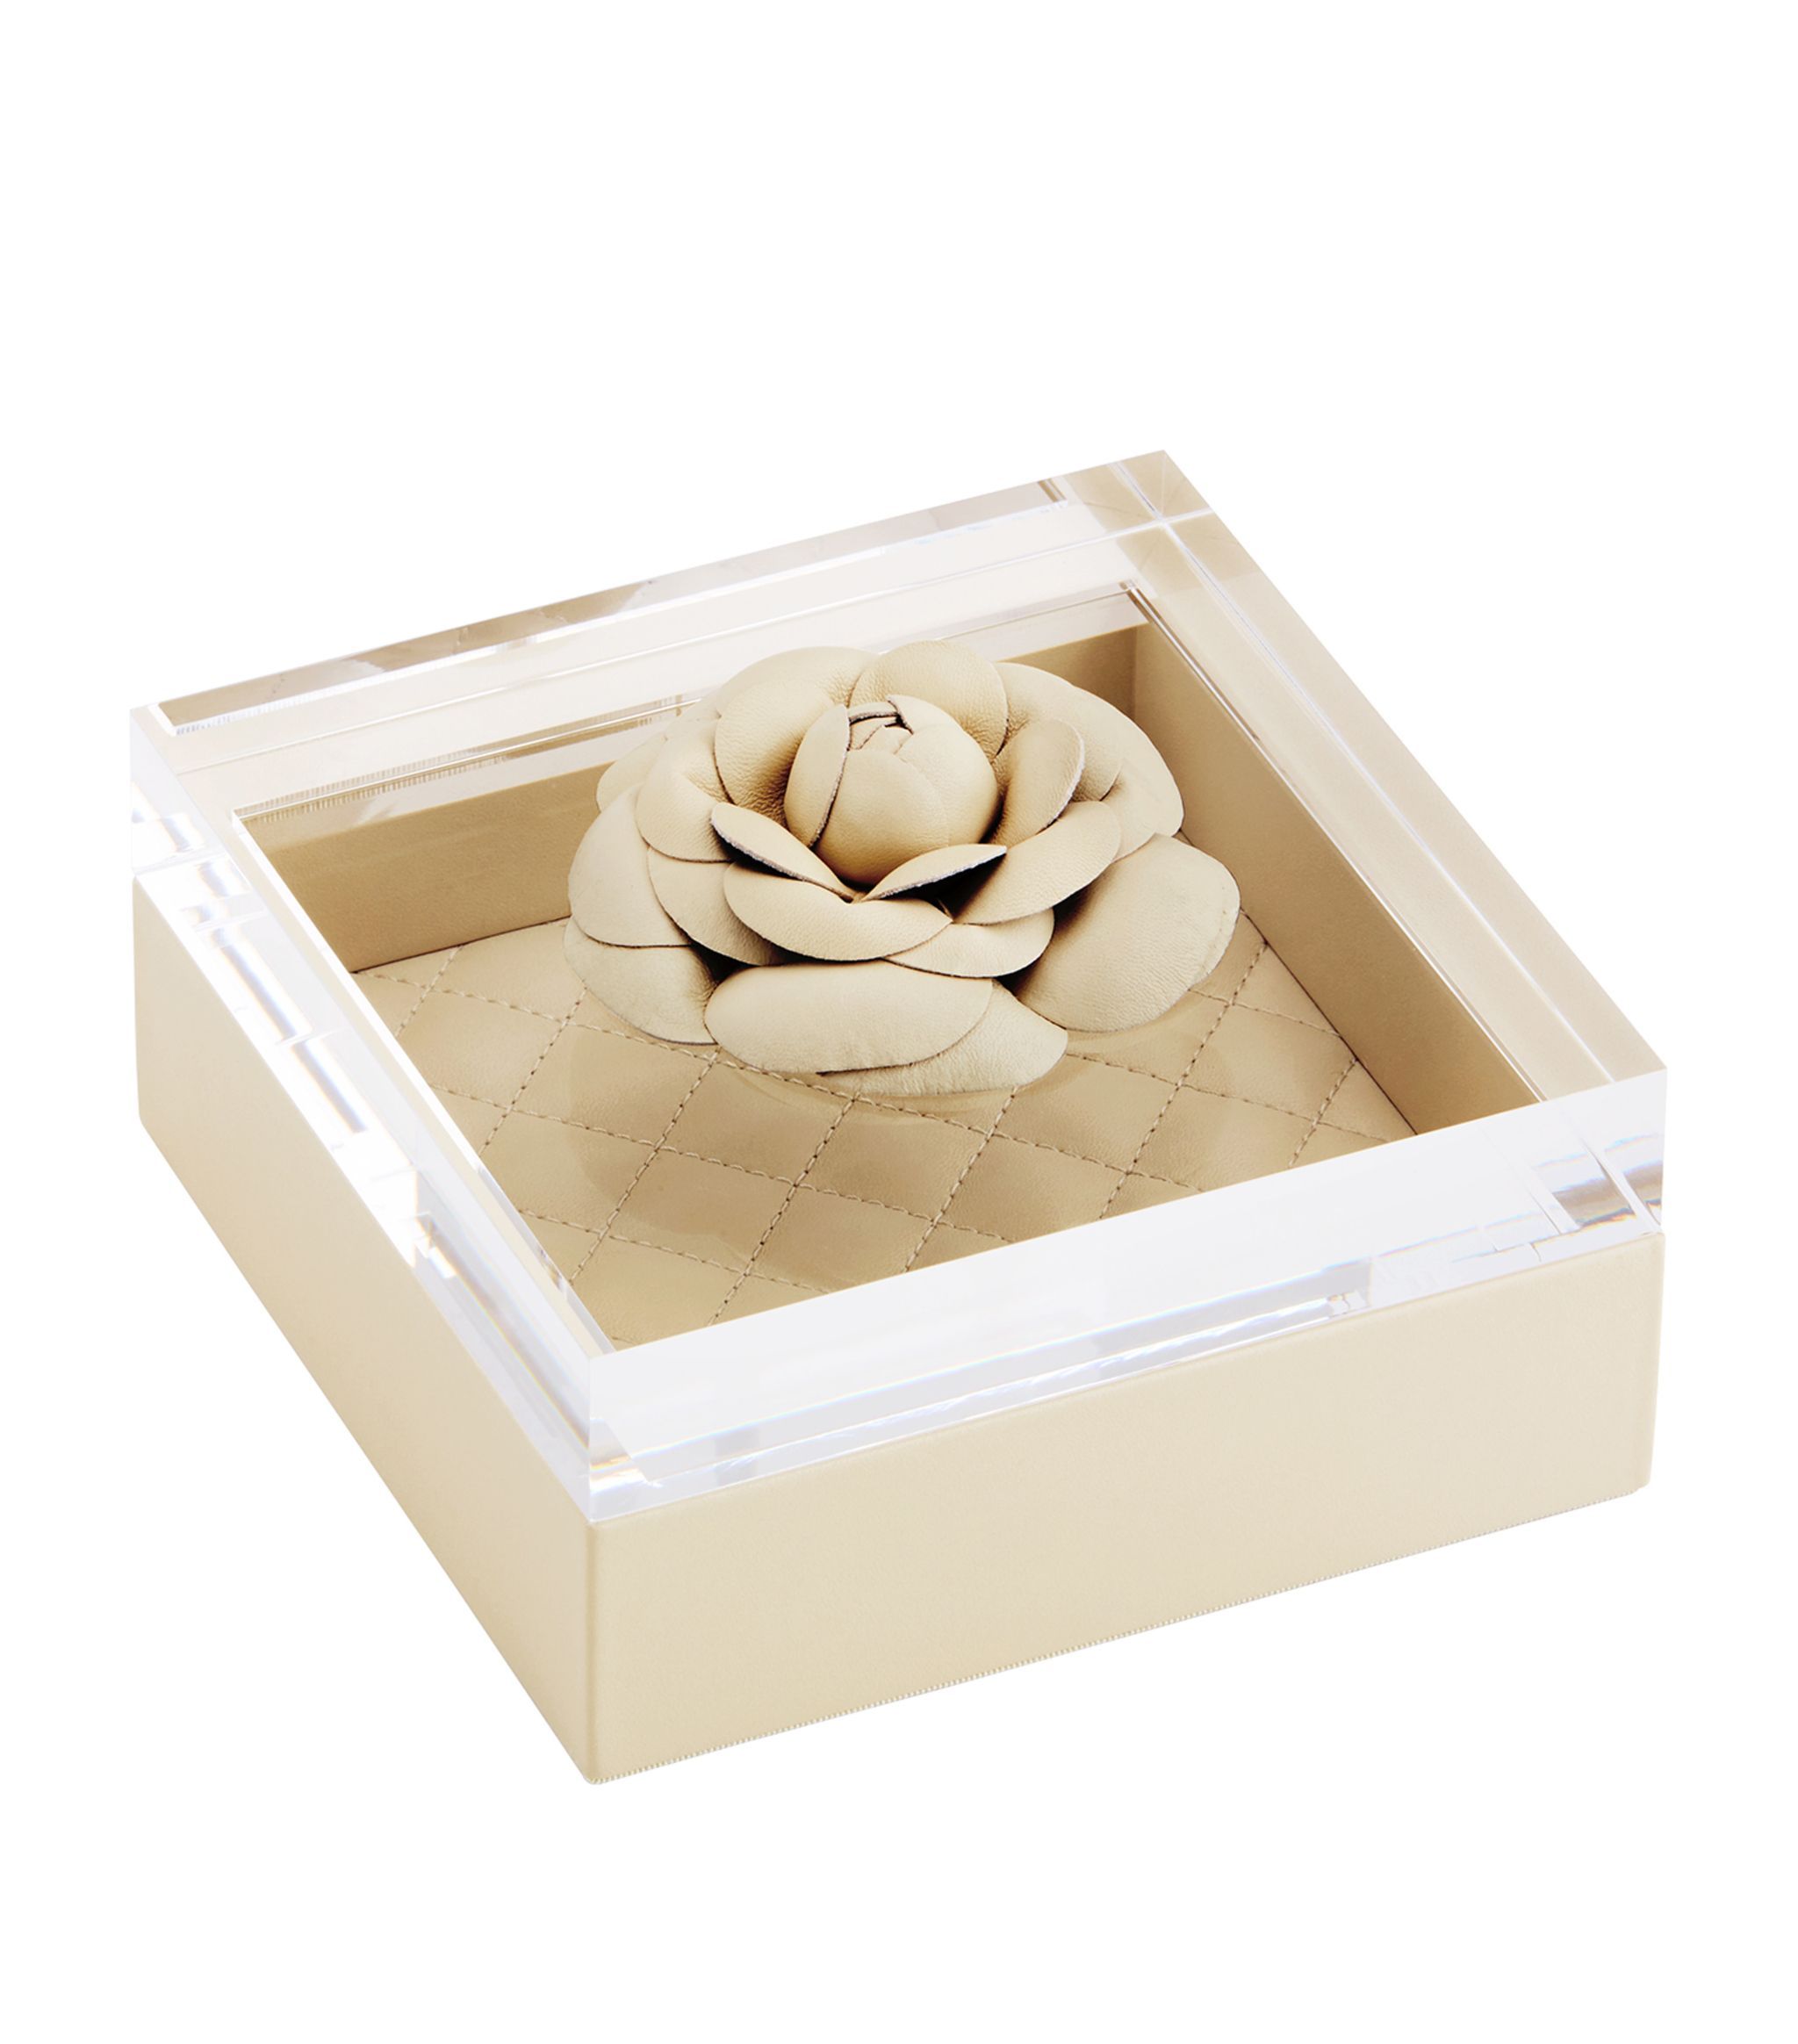 Quilted Floral Box | Harrods